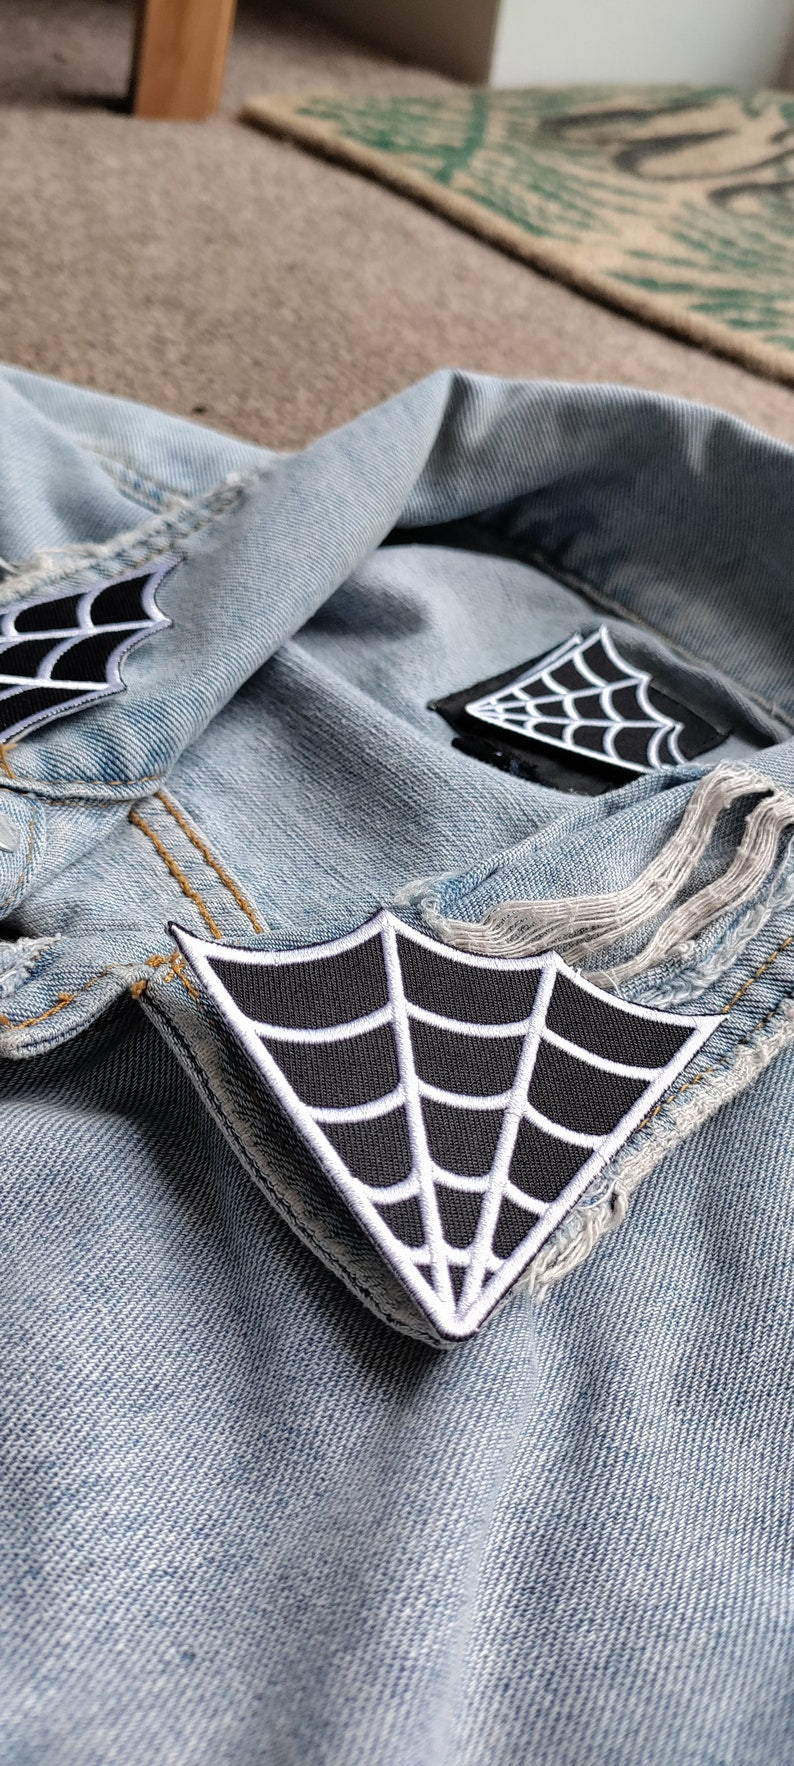 Web Of Lies // DIY Spider Embroidered Patch Applique Collar Iron Sew On Craft Motif Pair Creepy Cute Aesthetic Gothic Punk Metal For Jackets